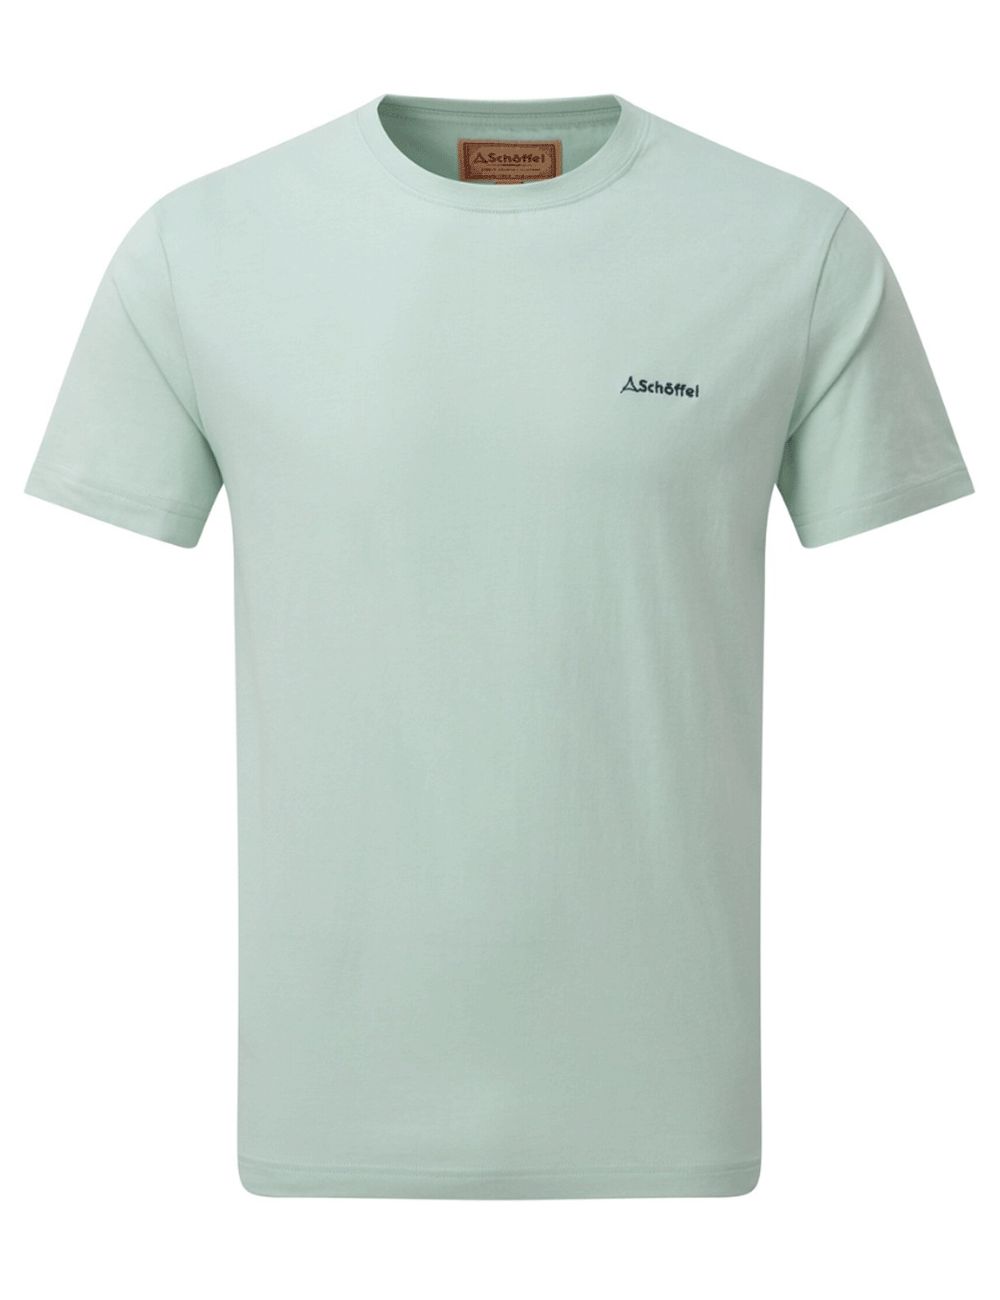 Schoffel's Trevone T-Shirt in Pale Mint on a white background